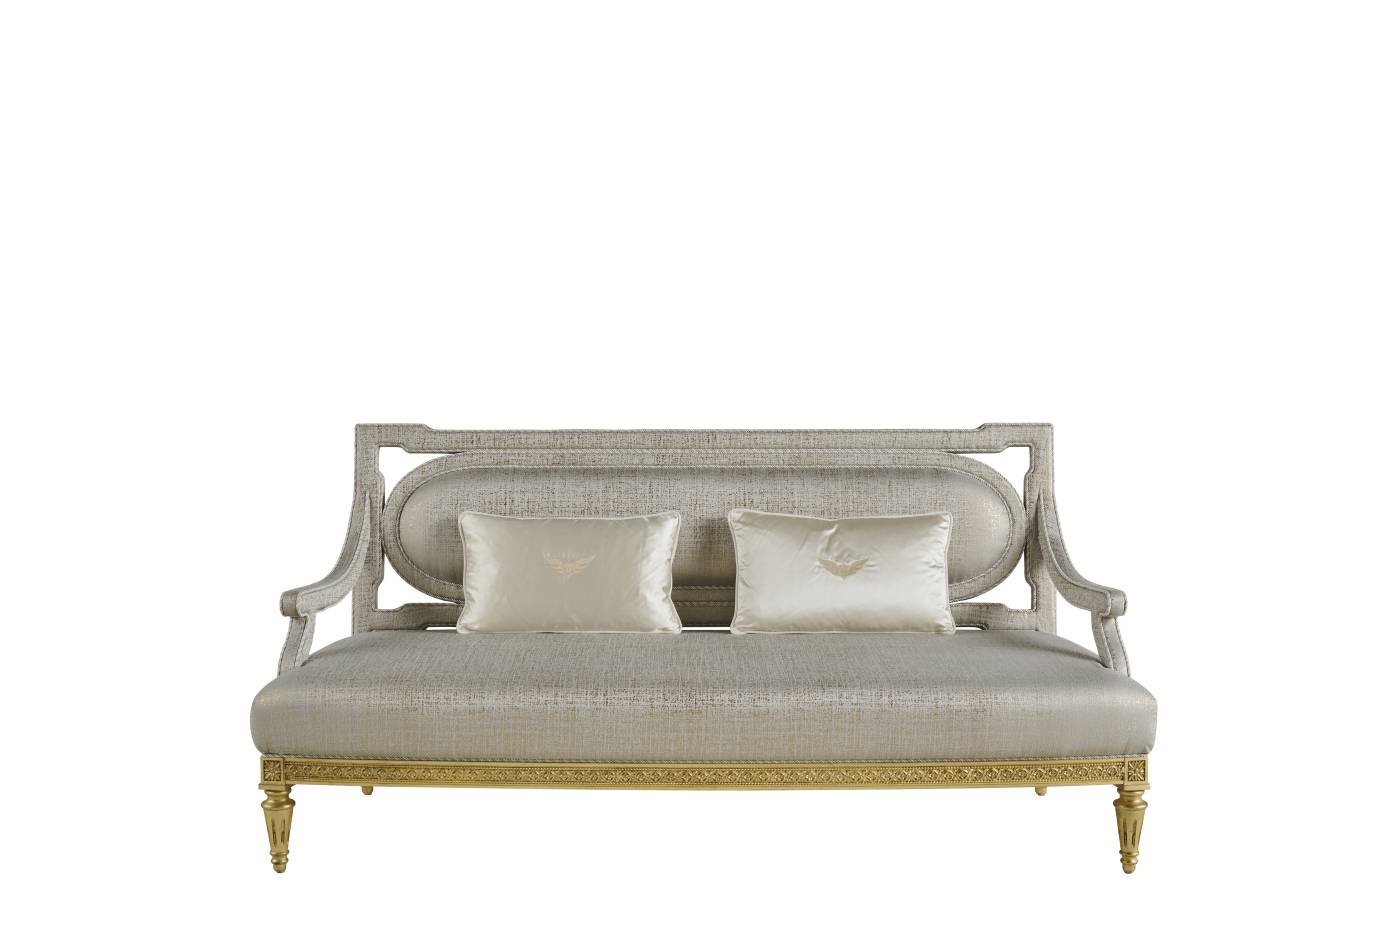 SATIN 2-seater sofa - Discover the elegance of luxury Héritage collection by Jumbo collection